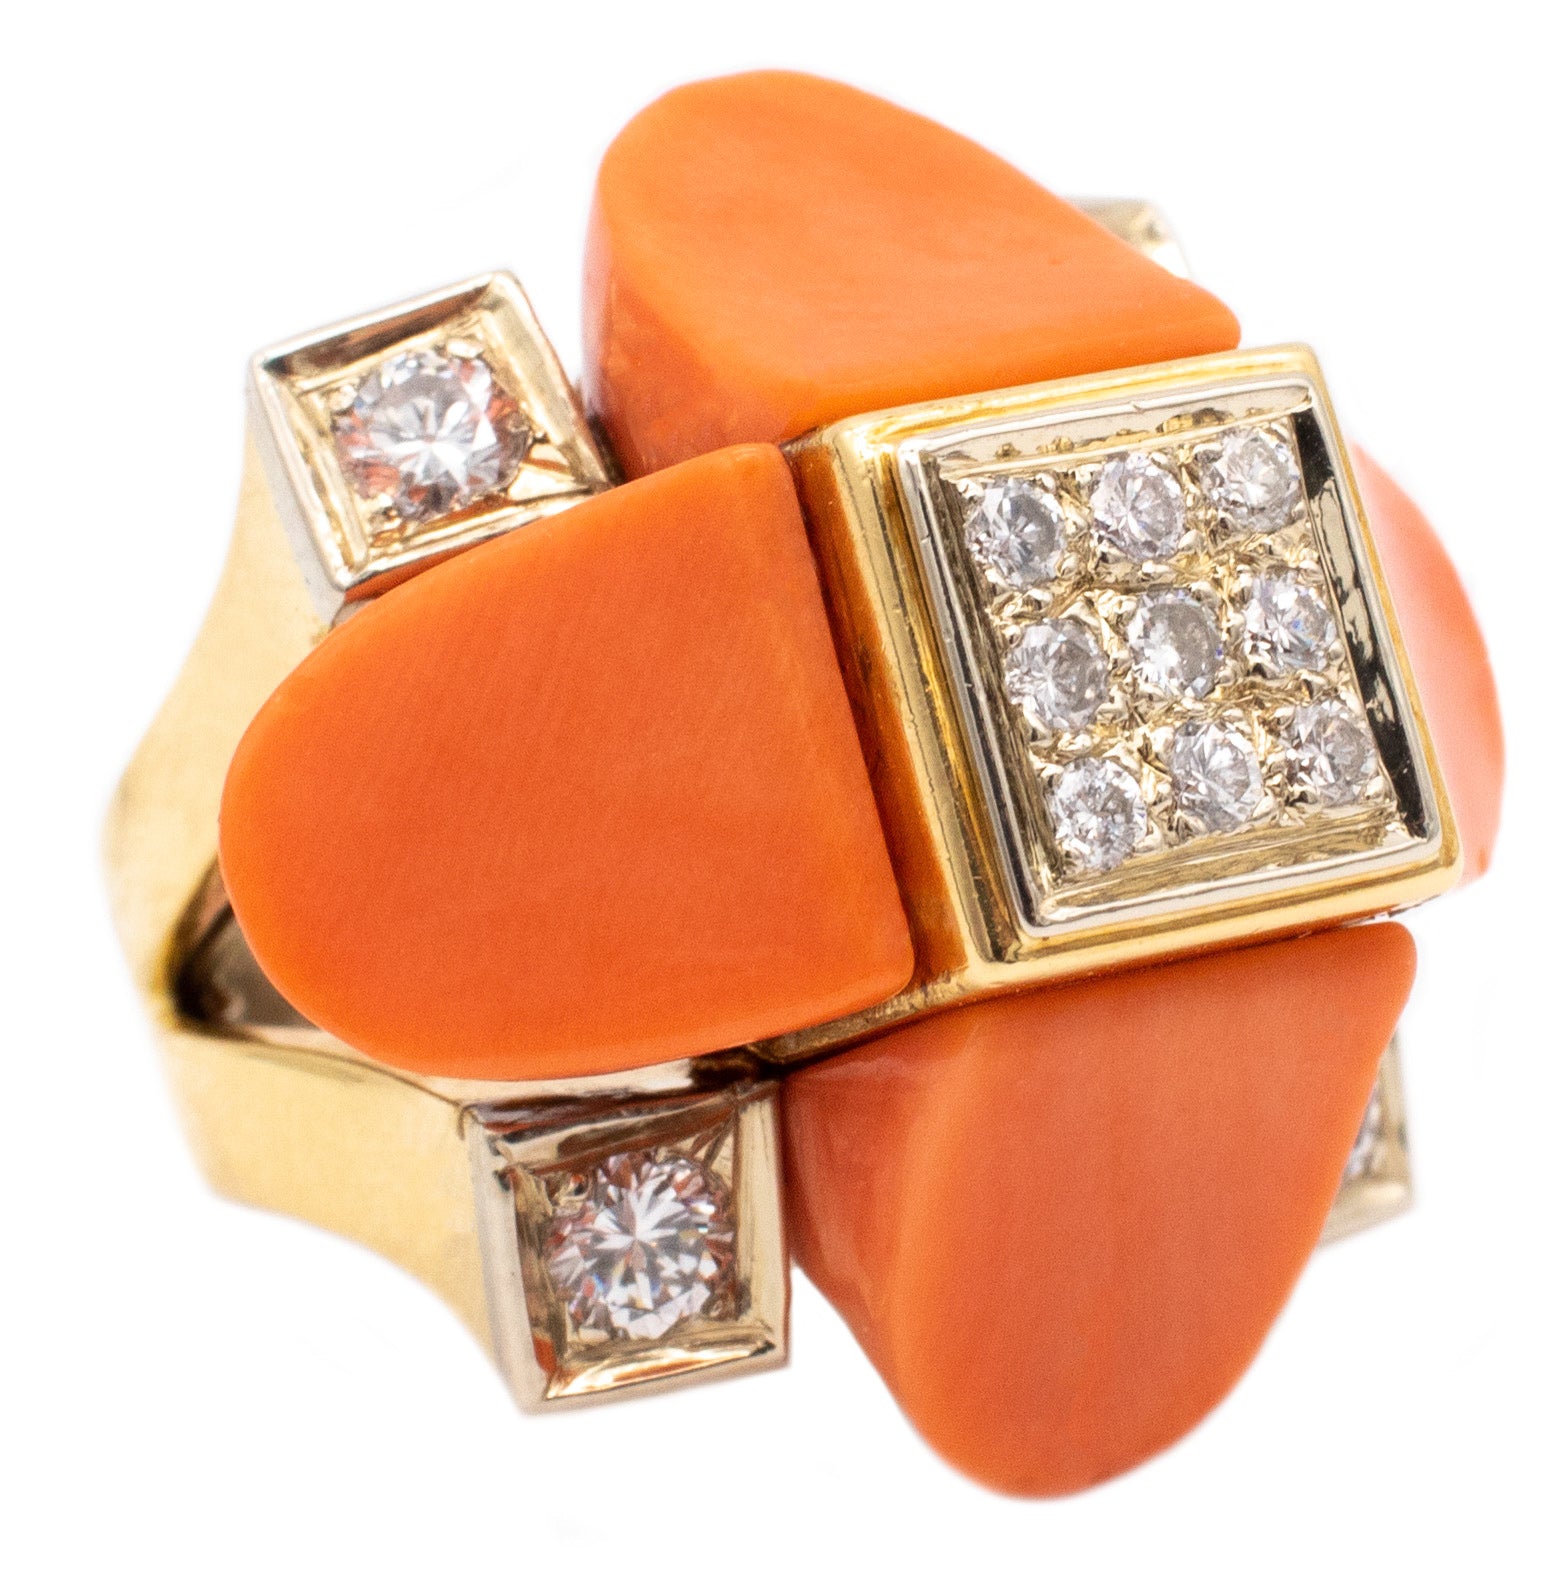 *Mid-century 1960 geometric cocktail ring in 18 kt gold with diamonds & coral